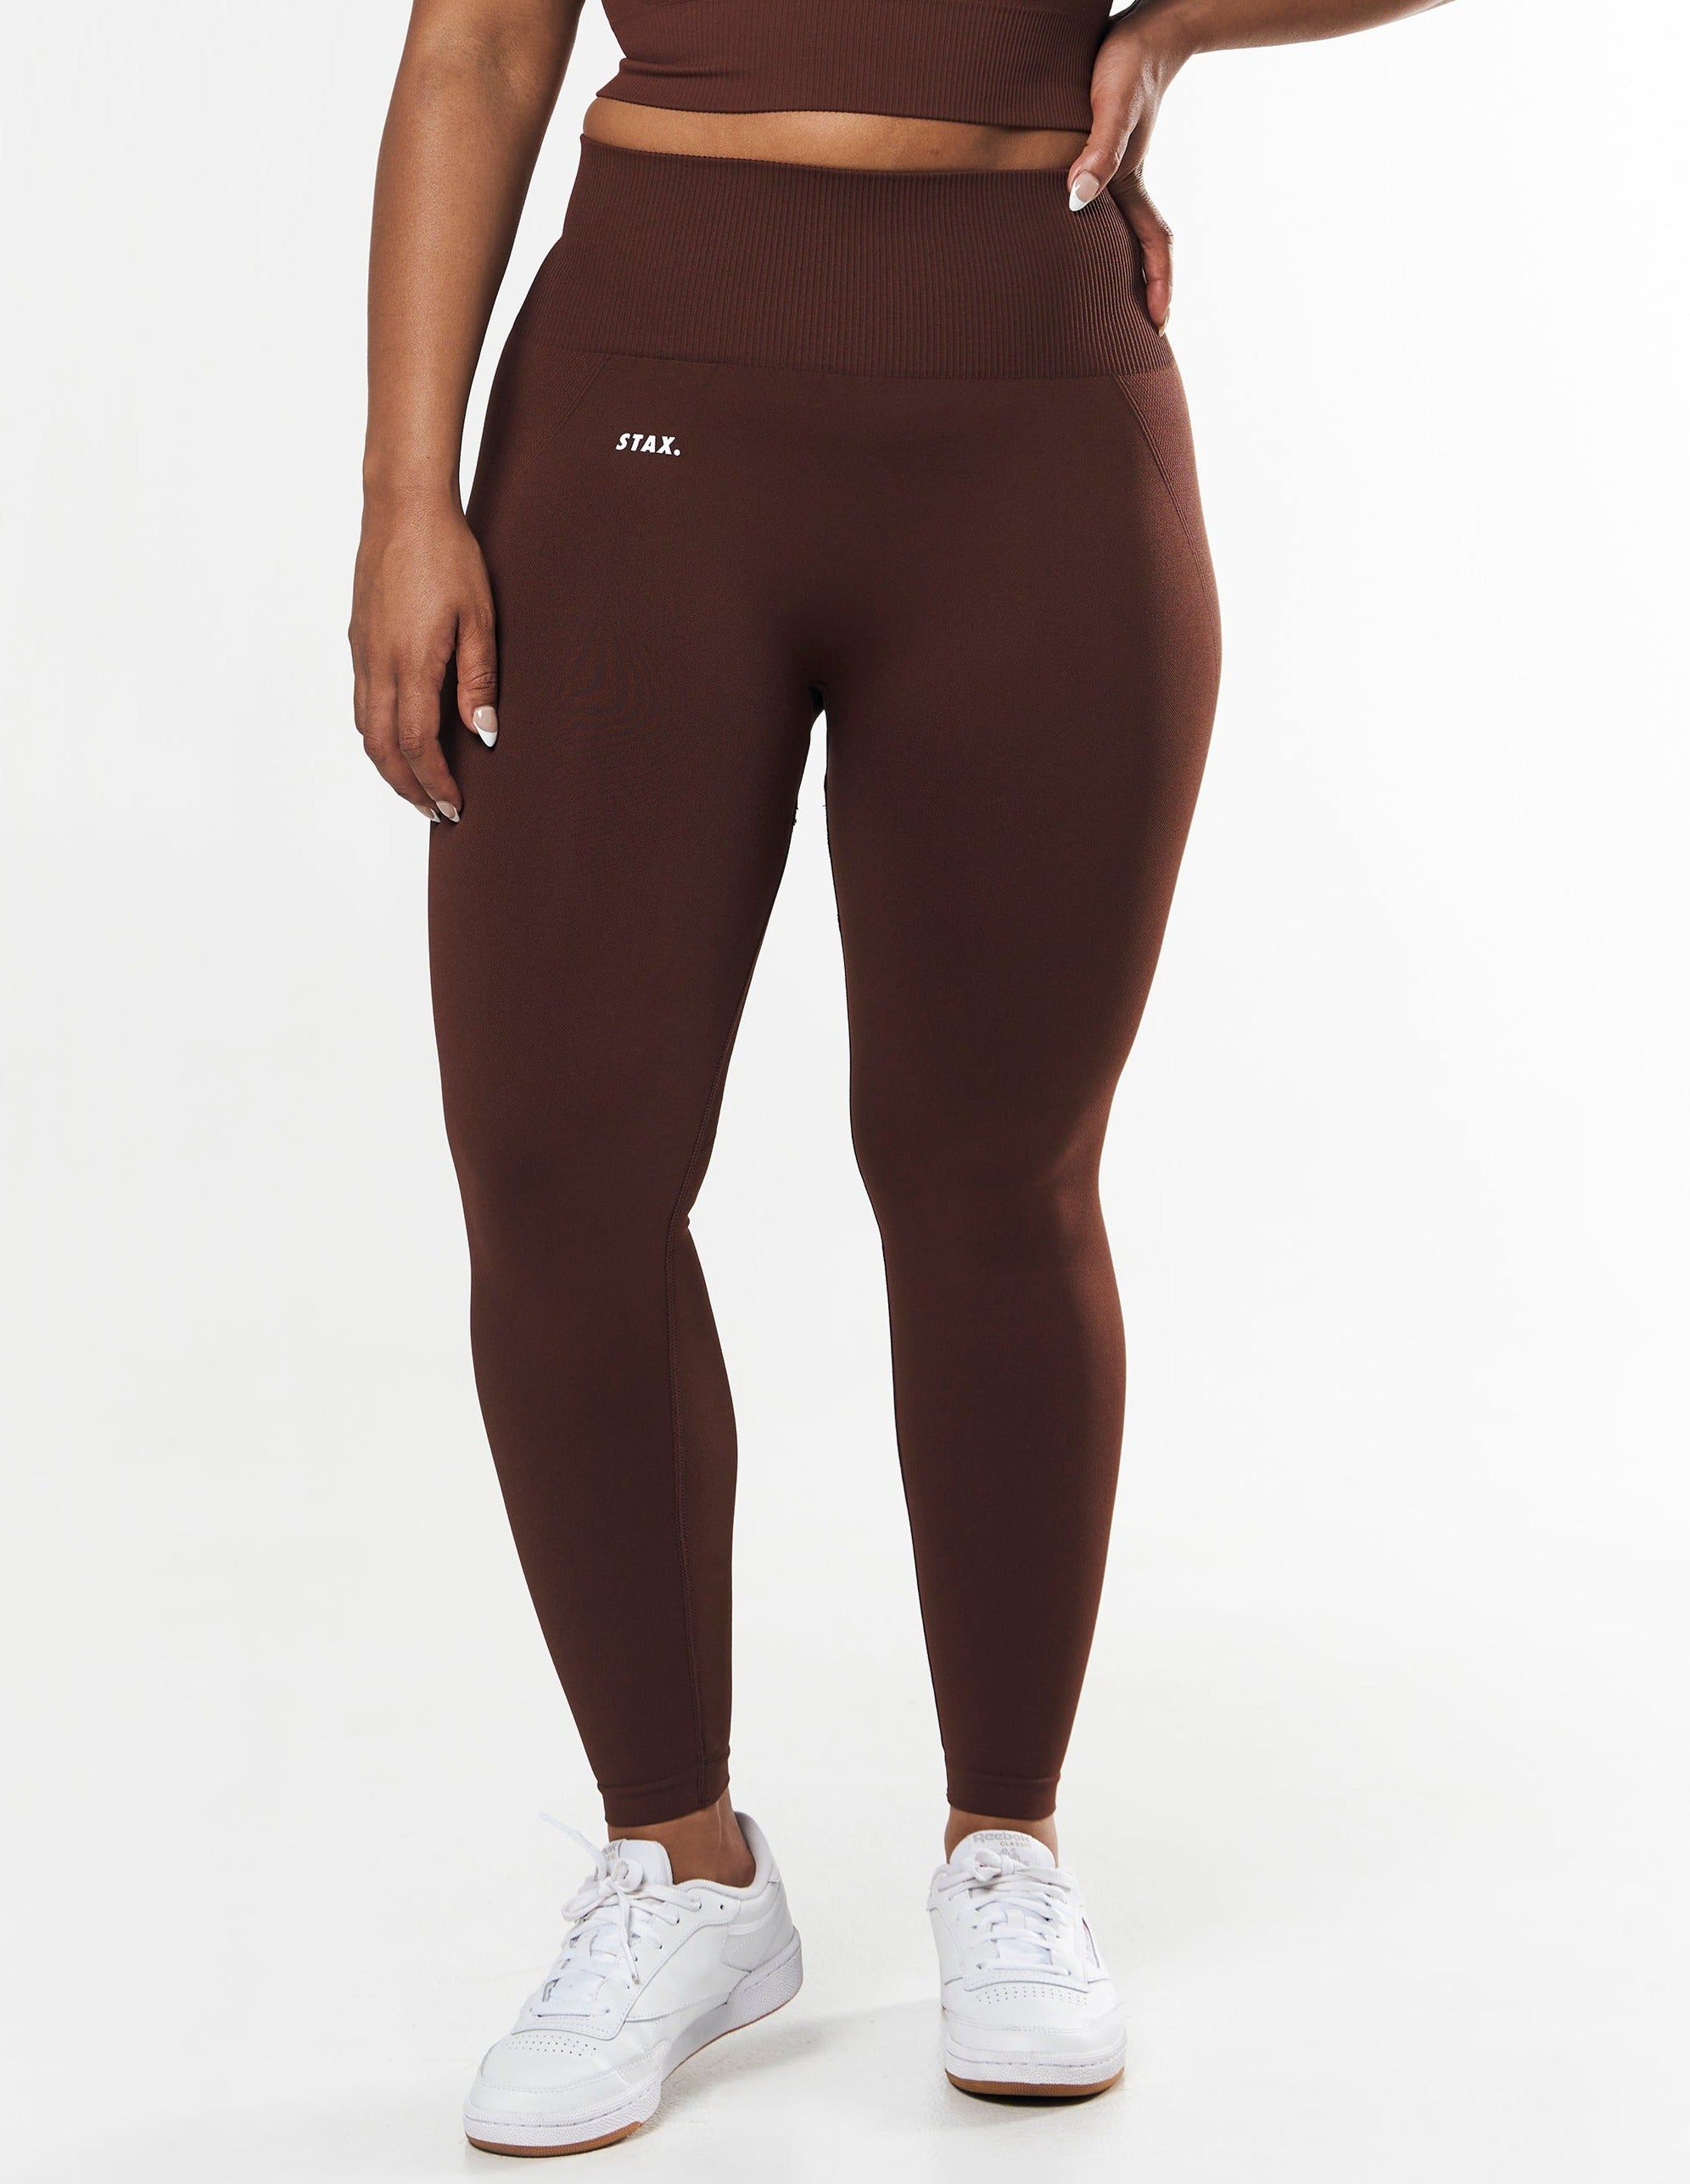 stax-ps-full-length-tights-umber